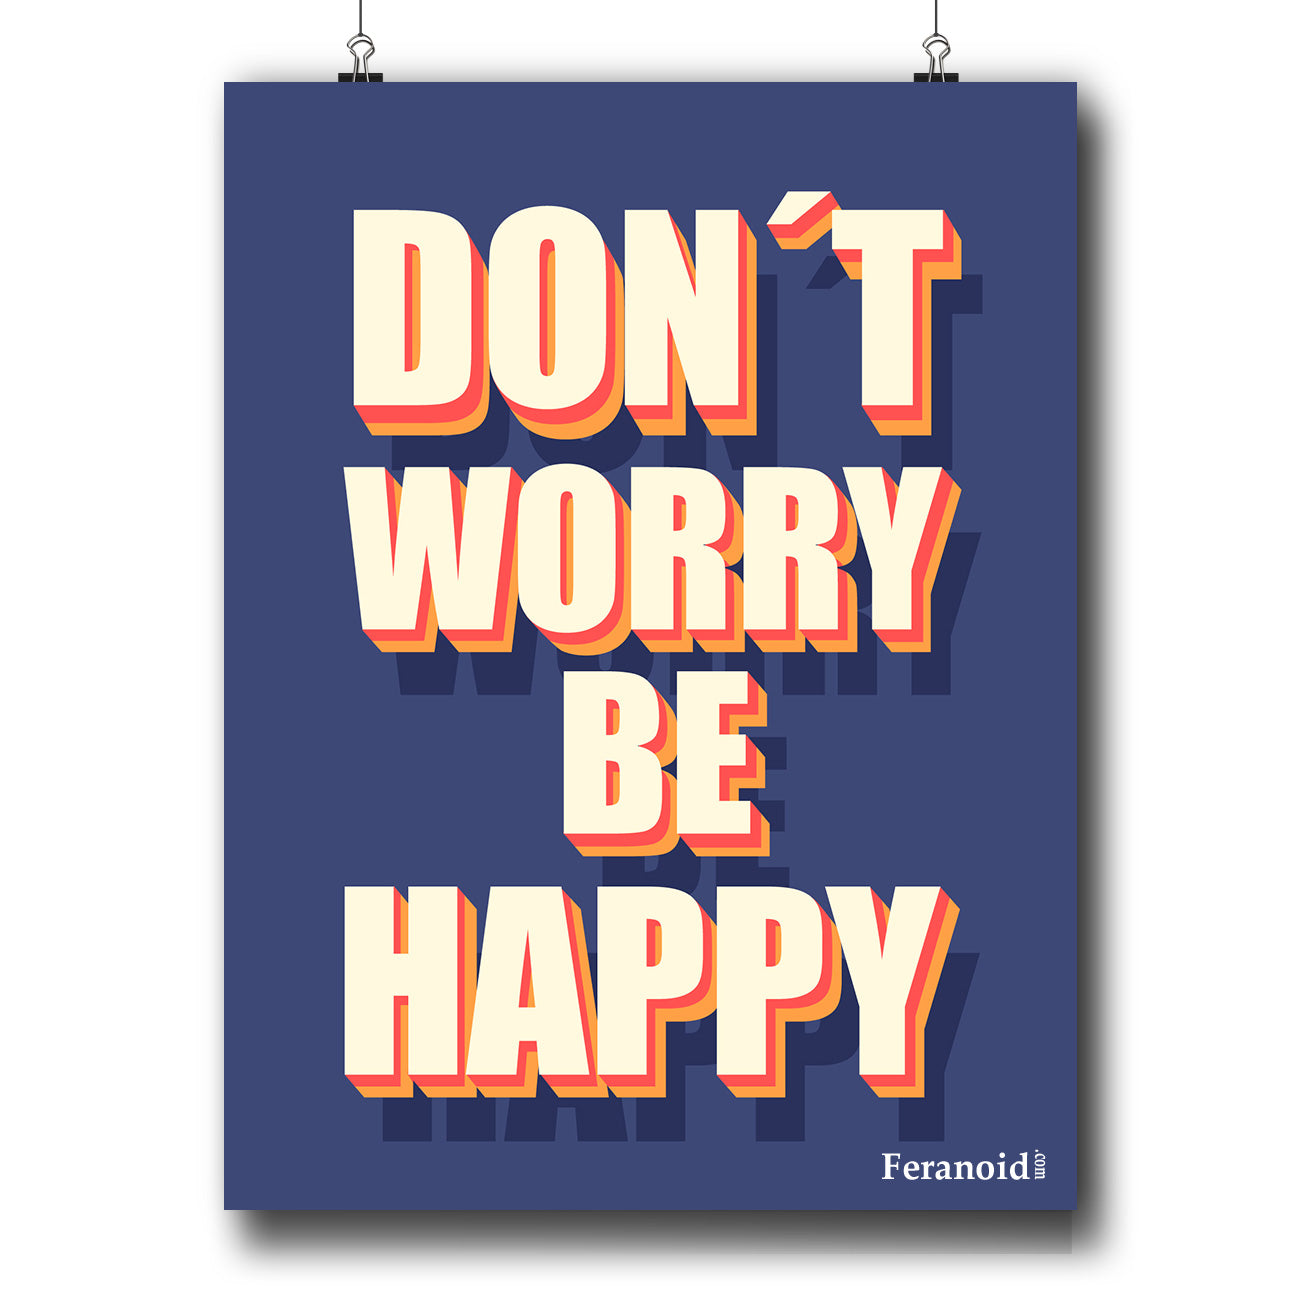 DON'T WORRY BE HAPPY POSTER